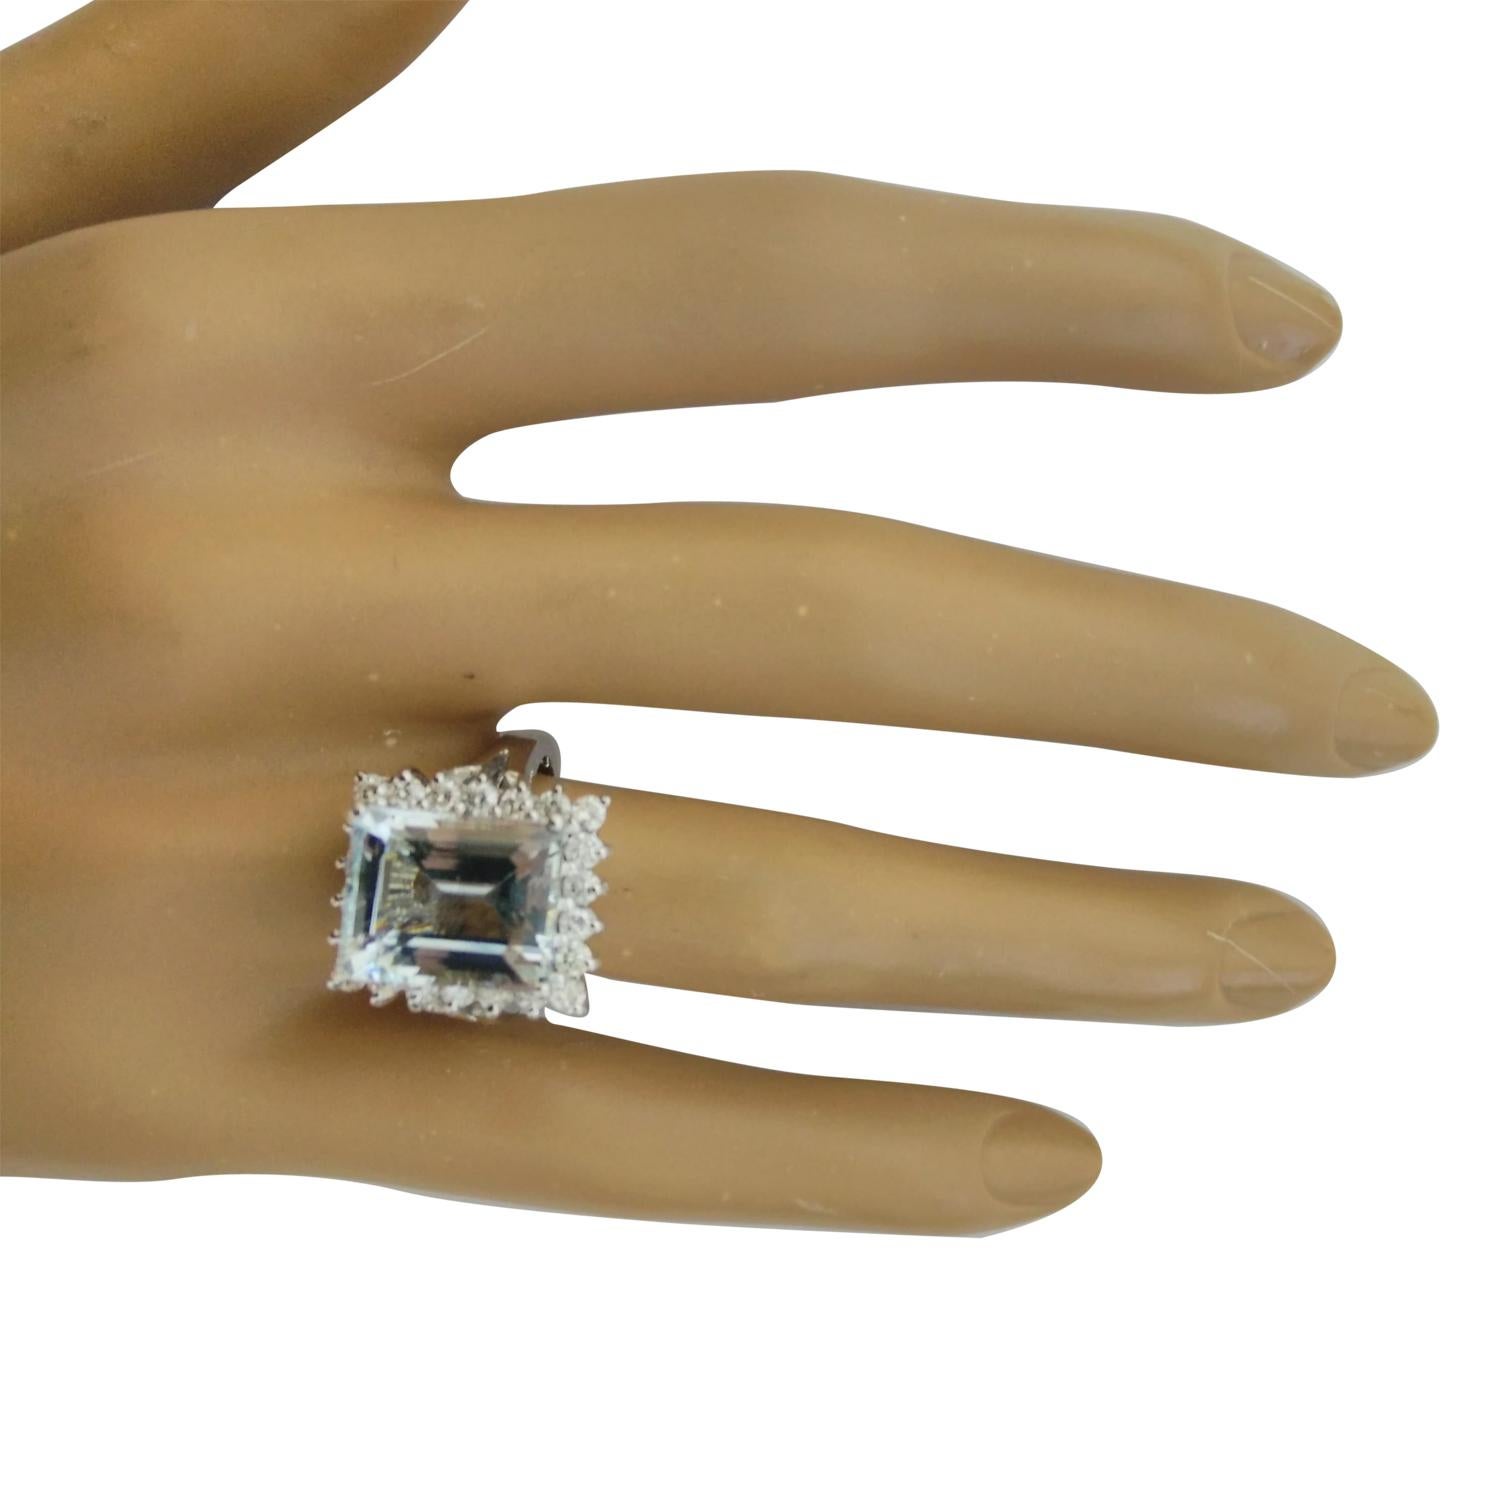 7.23 Carat Natural Aquamarine 14 Karat Solid White Gold Diamond Ring
Stamped: 14K 
Total Ring Weight: 9.2 Grams 
Aquamarine Weight: 6.43 Carat (12.00x10.00 Millimeters)  
Diamond Weight: 0.80 Carat (F-G Color, VS2-SI1 Clarity )
Face Measures: